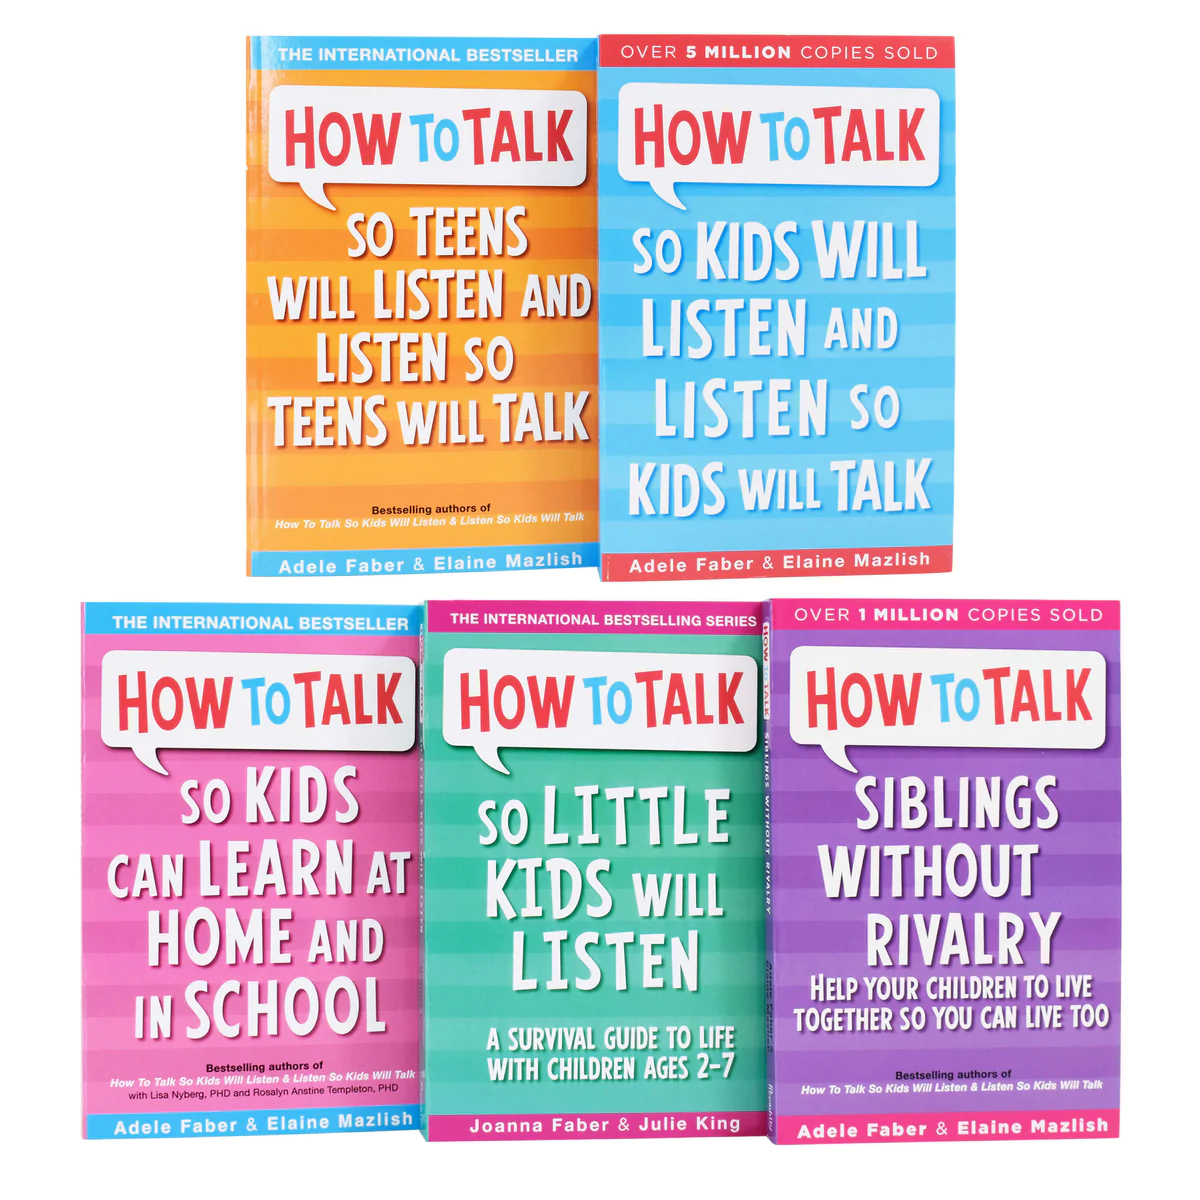 How to Talk So Kids Can Learn At Home and in School